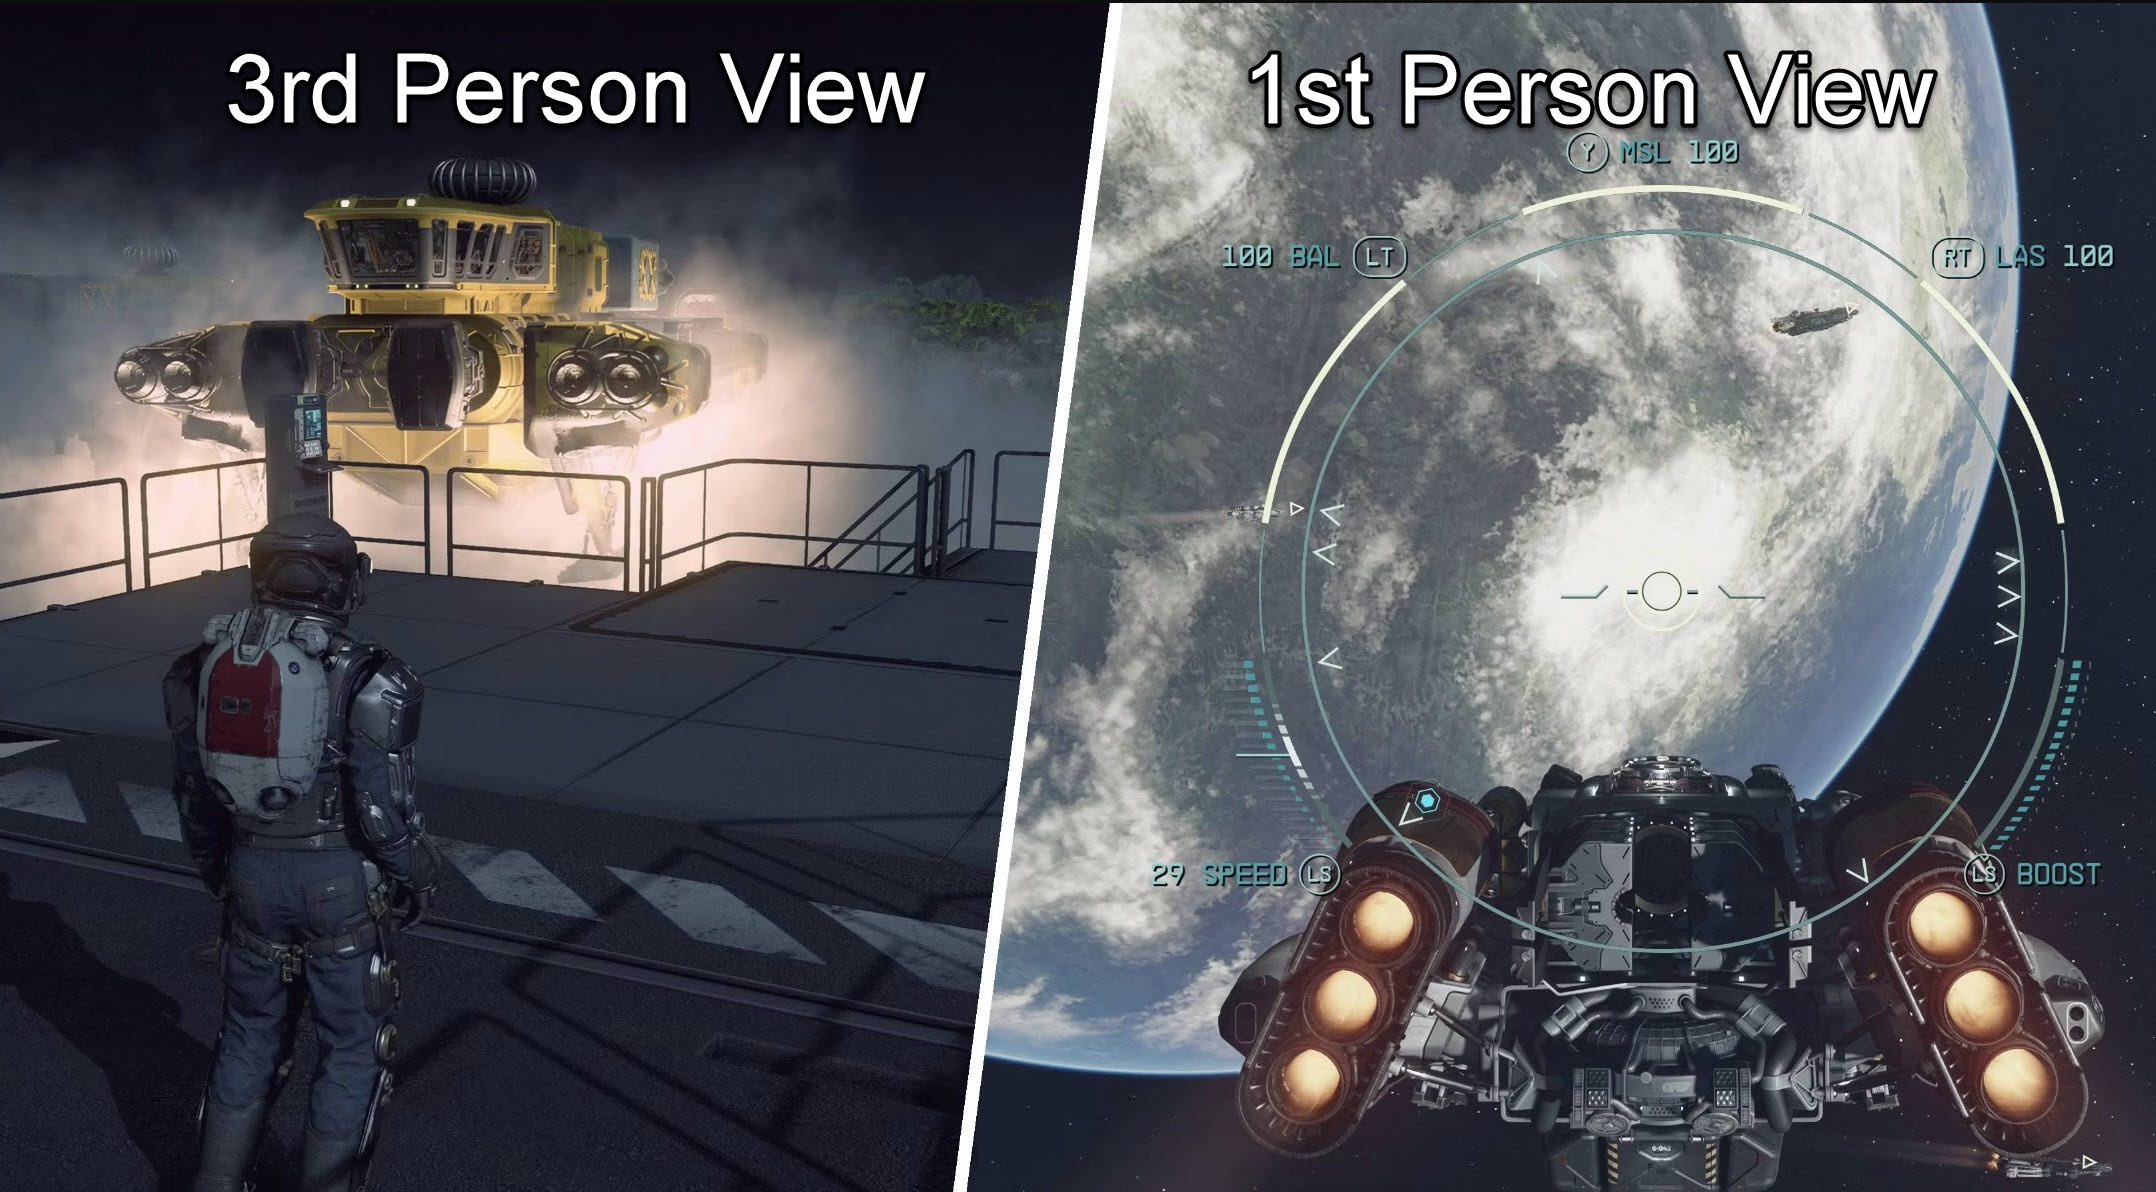 First Person Vs Third Person